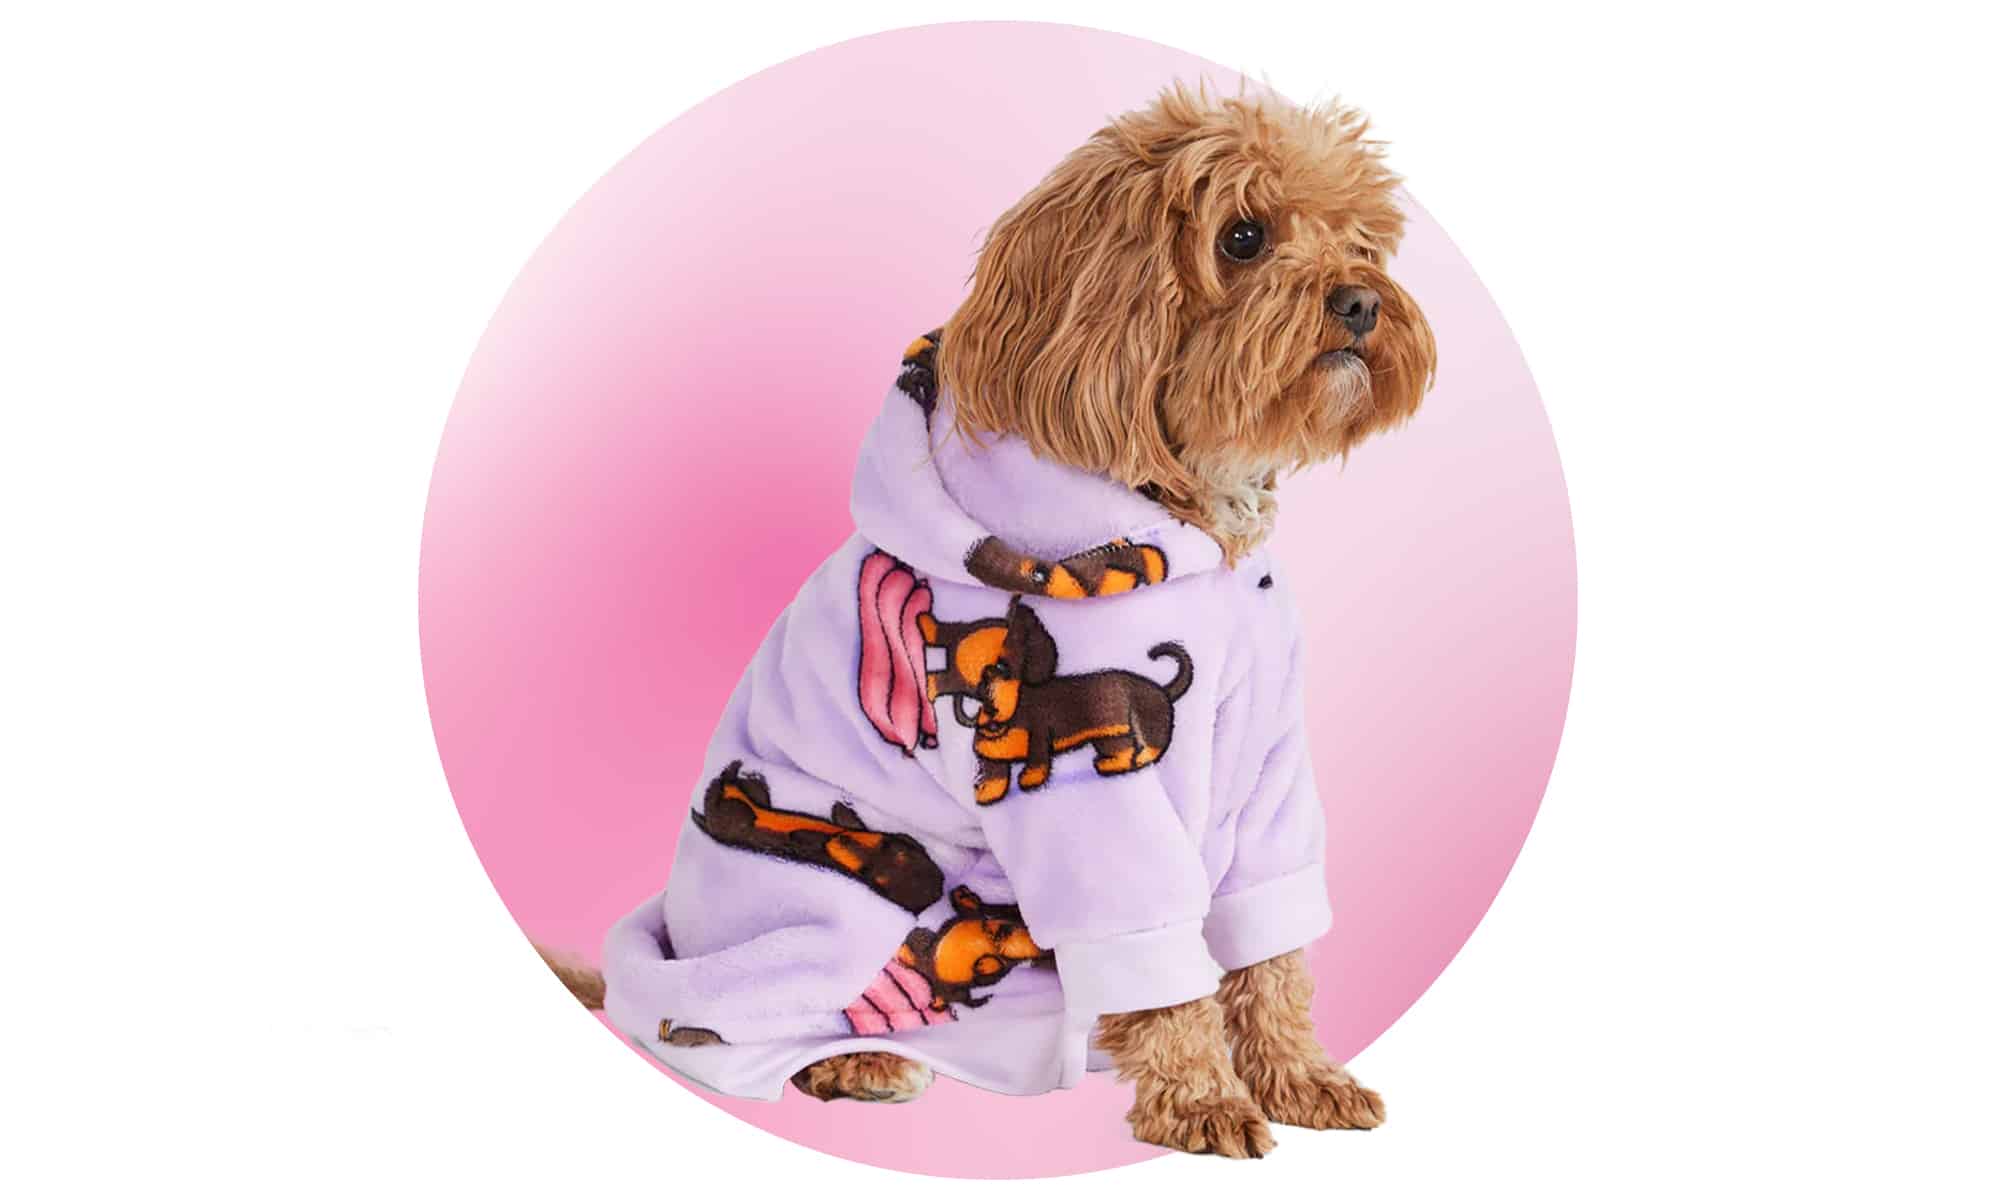 The Black Friday sale features the Oodie pet range.